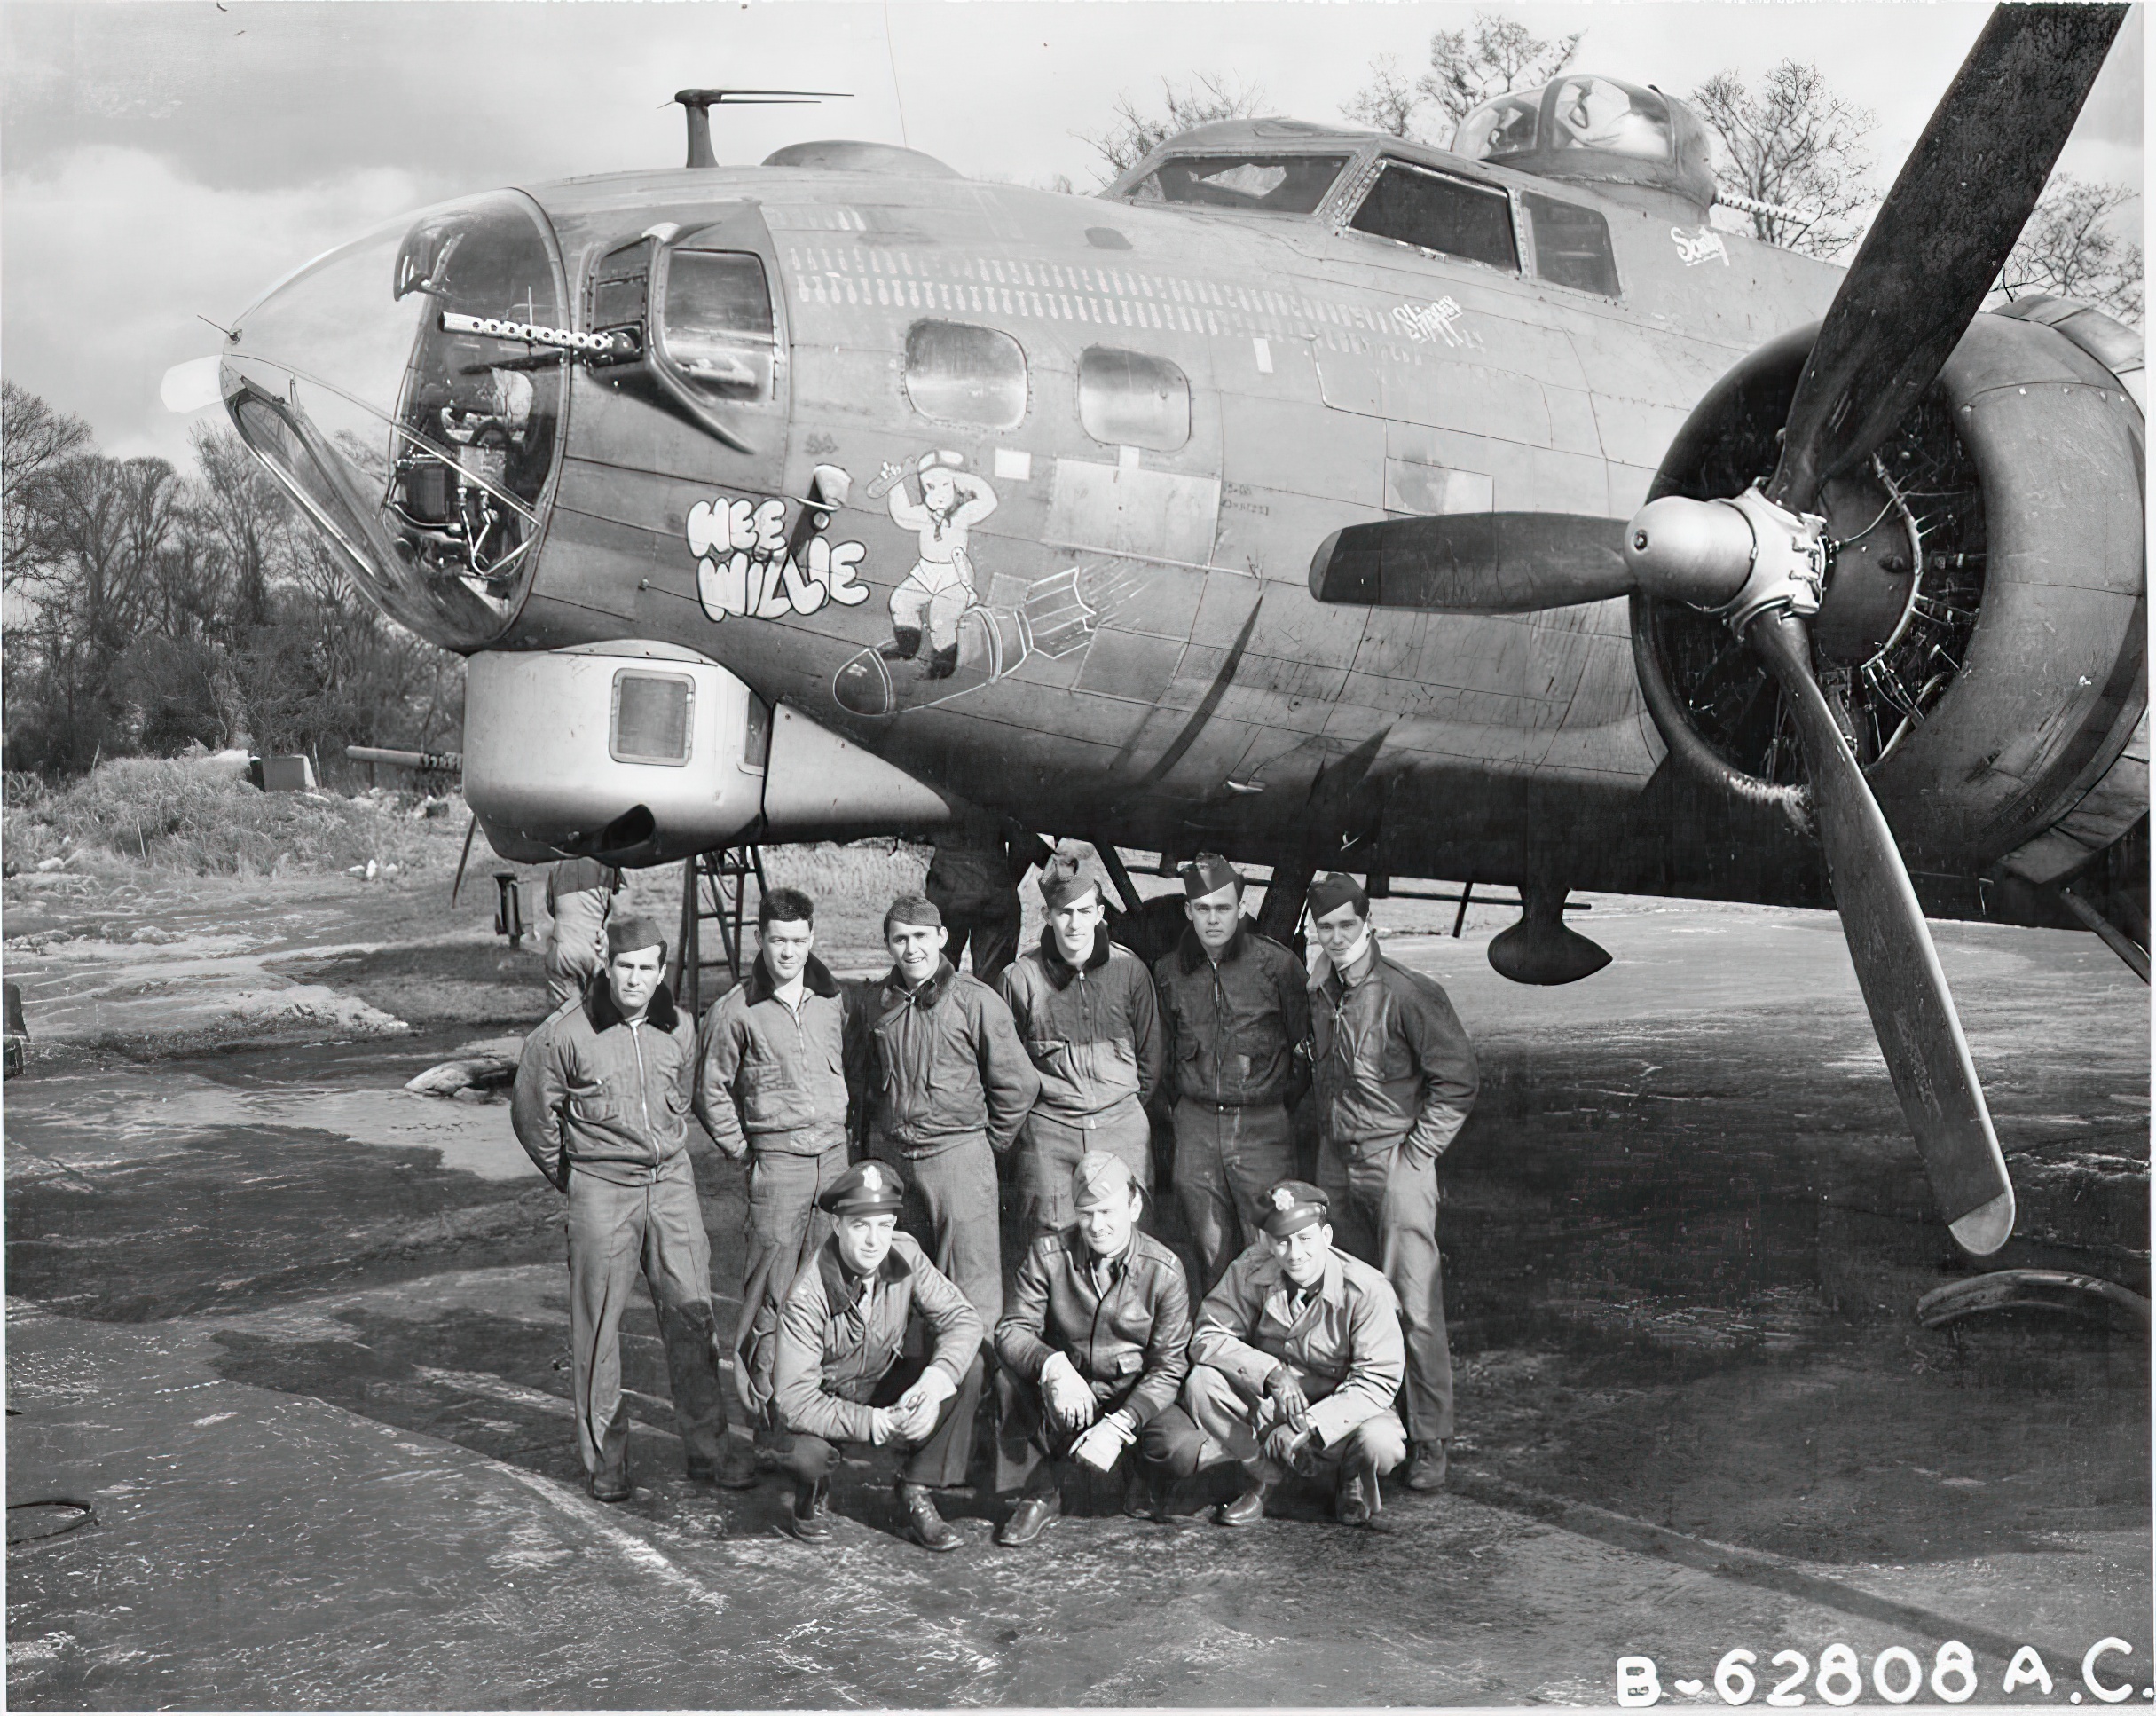 Combat crew of the Boeing B-17G Flying Fortress Wee Willie. (Photo Credit: Al_Skiff / Fold3 / American Air Museum